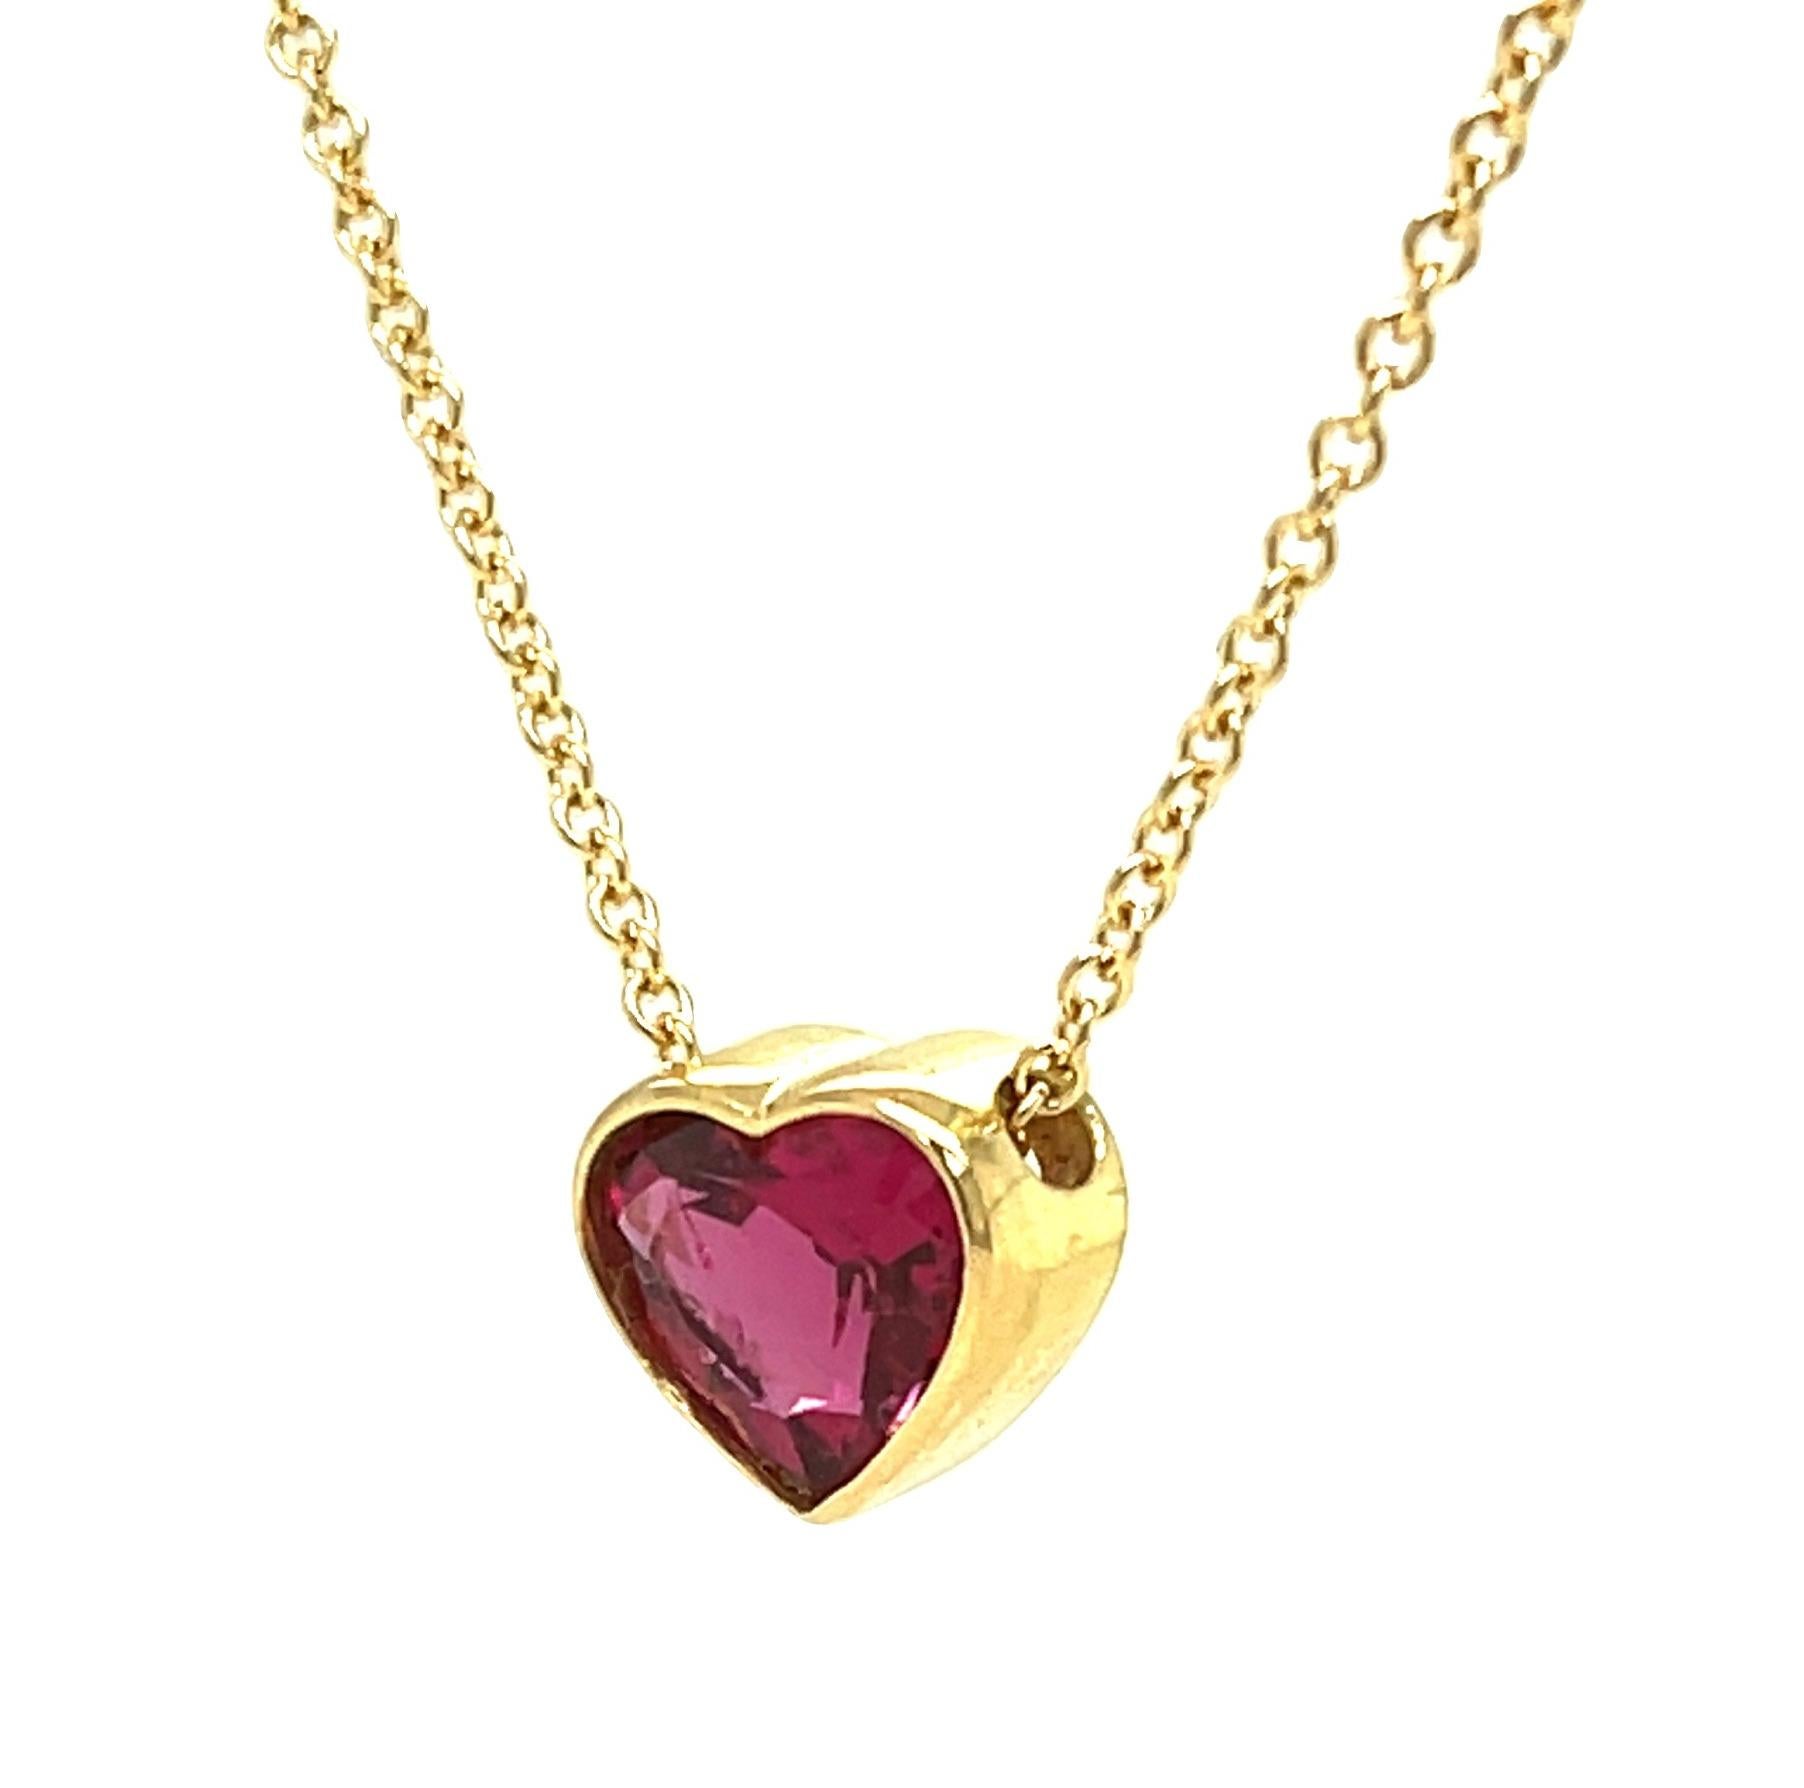 Heart Cut 1.99 Carat Heart Shaped Pink Rubellite Tourmaline Necklace in 18k Yellow Gold For Sale